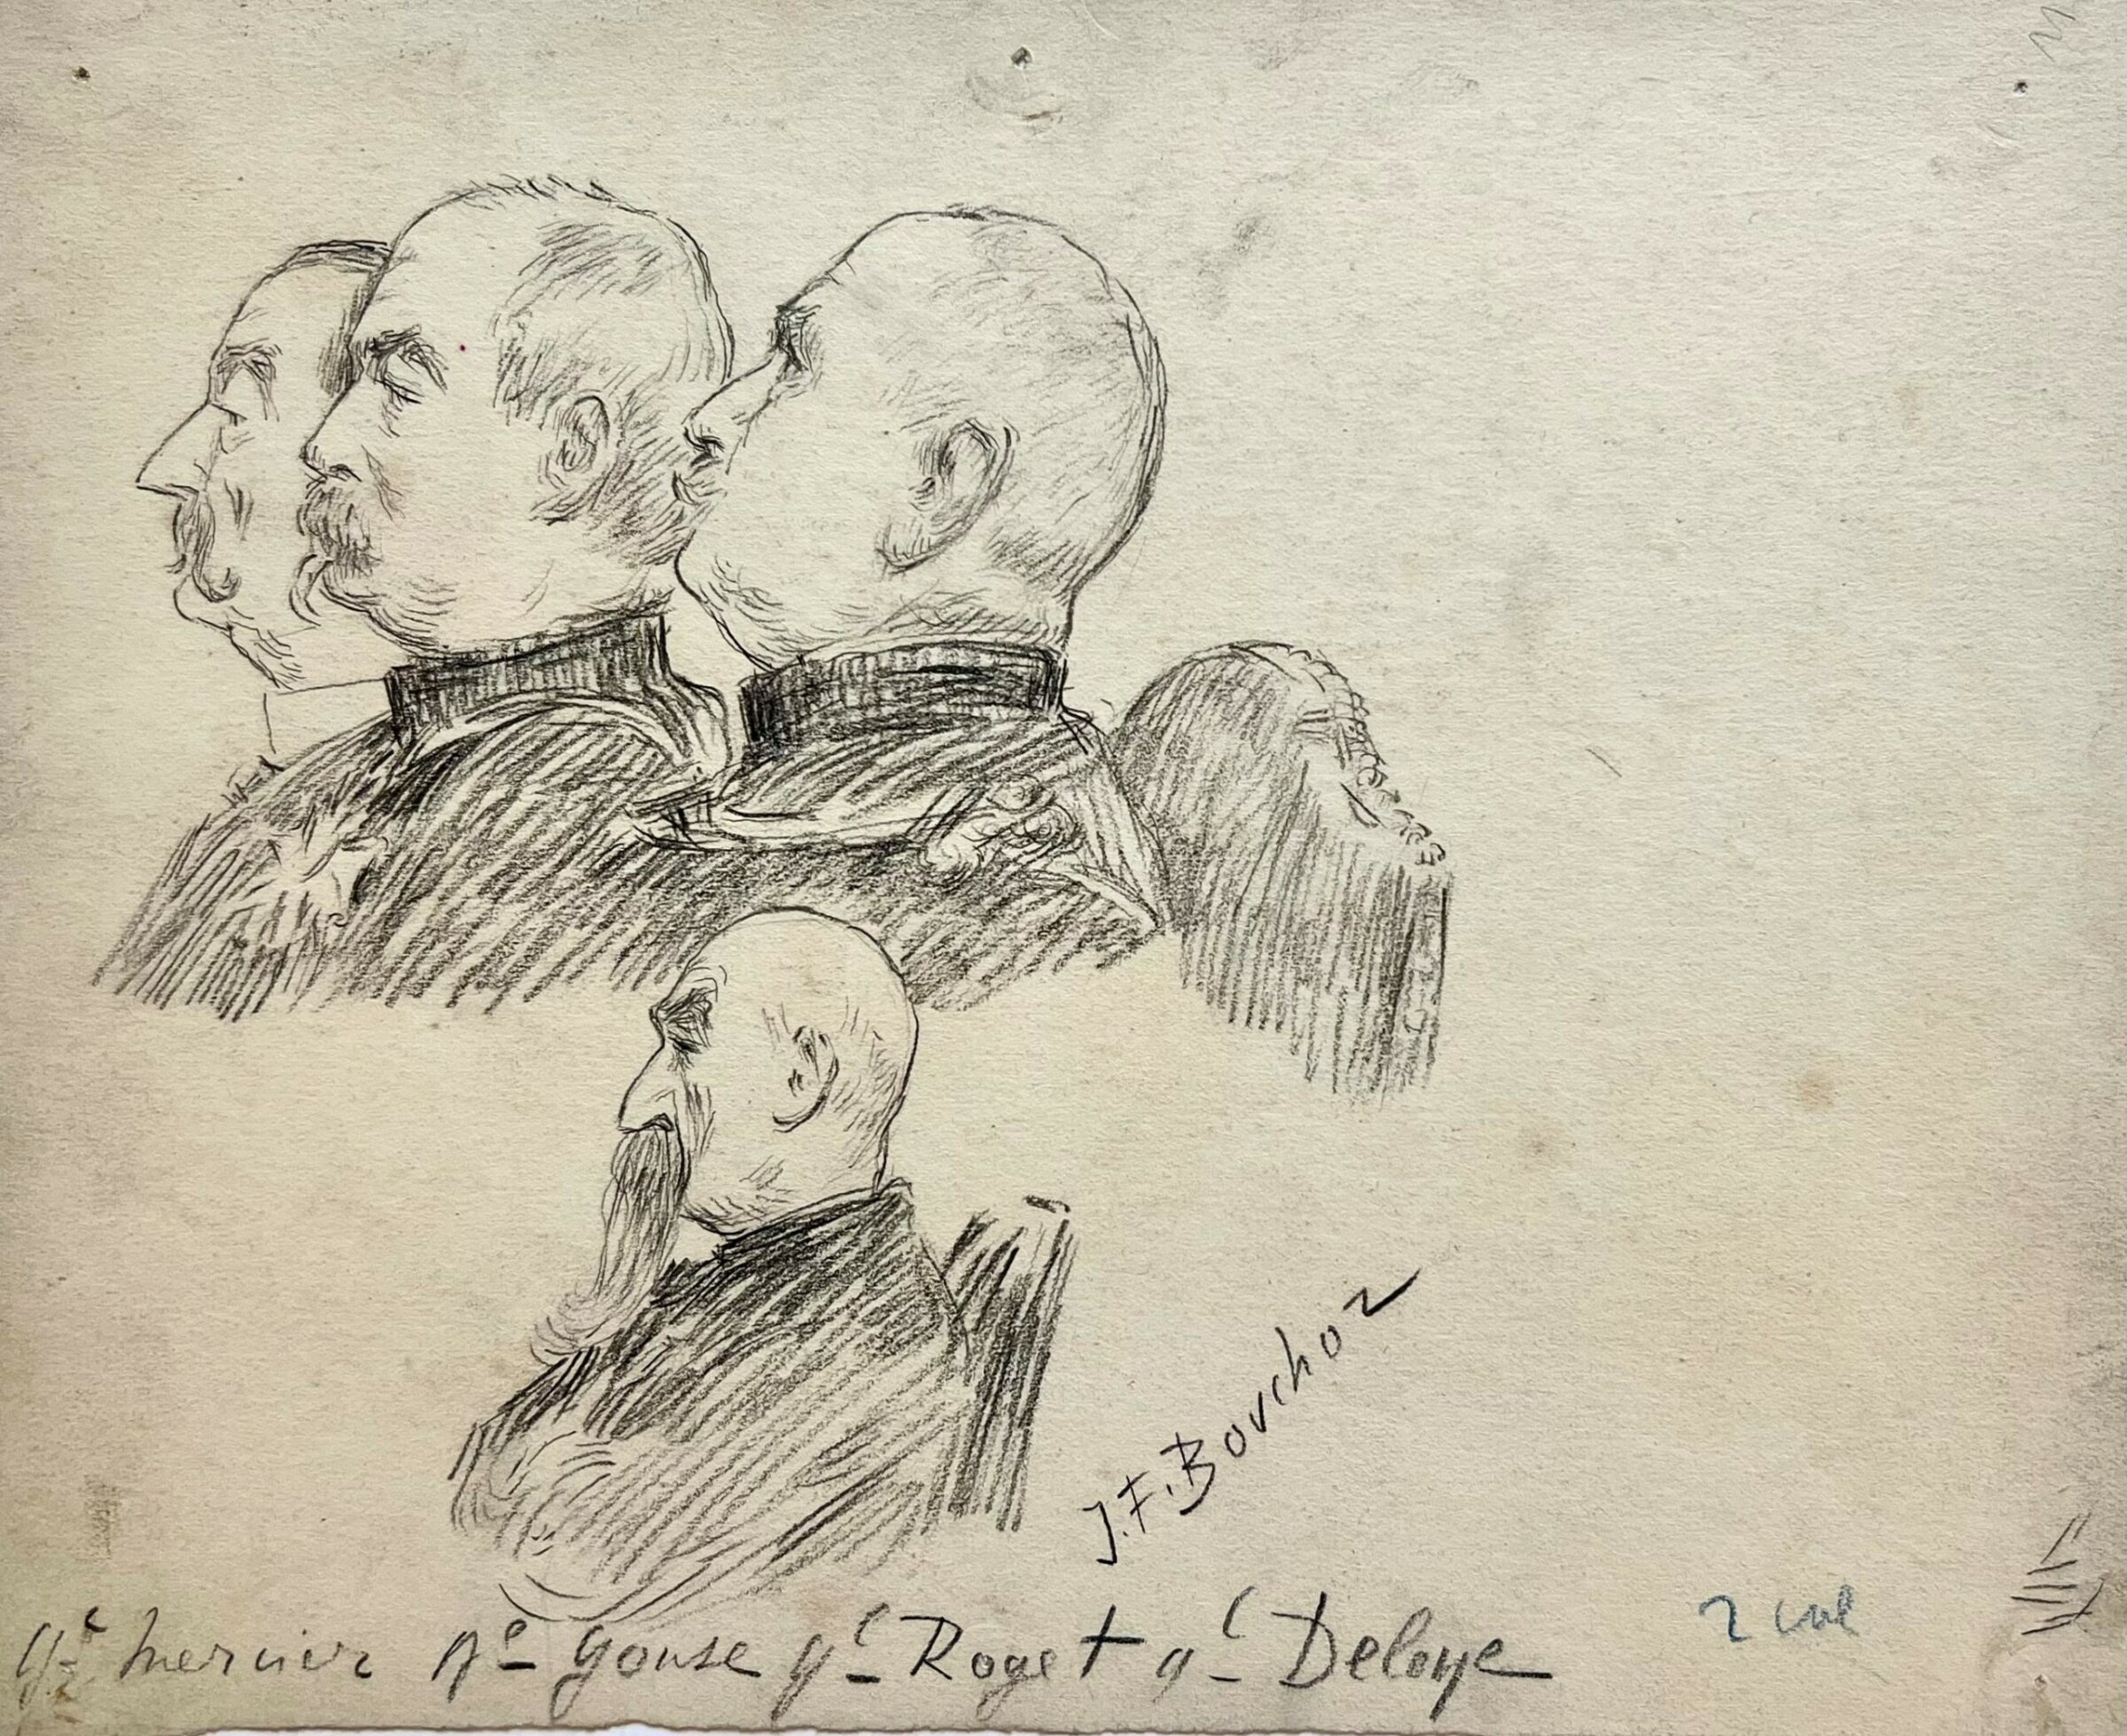 Courtroom Sketches of Anti-Dreyfus French Generals